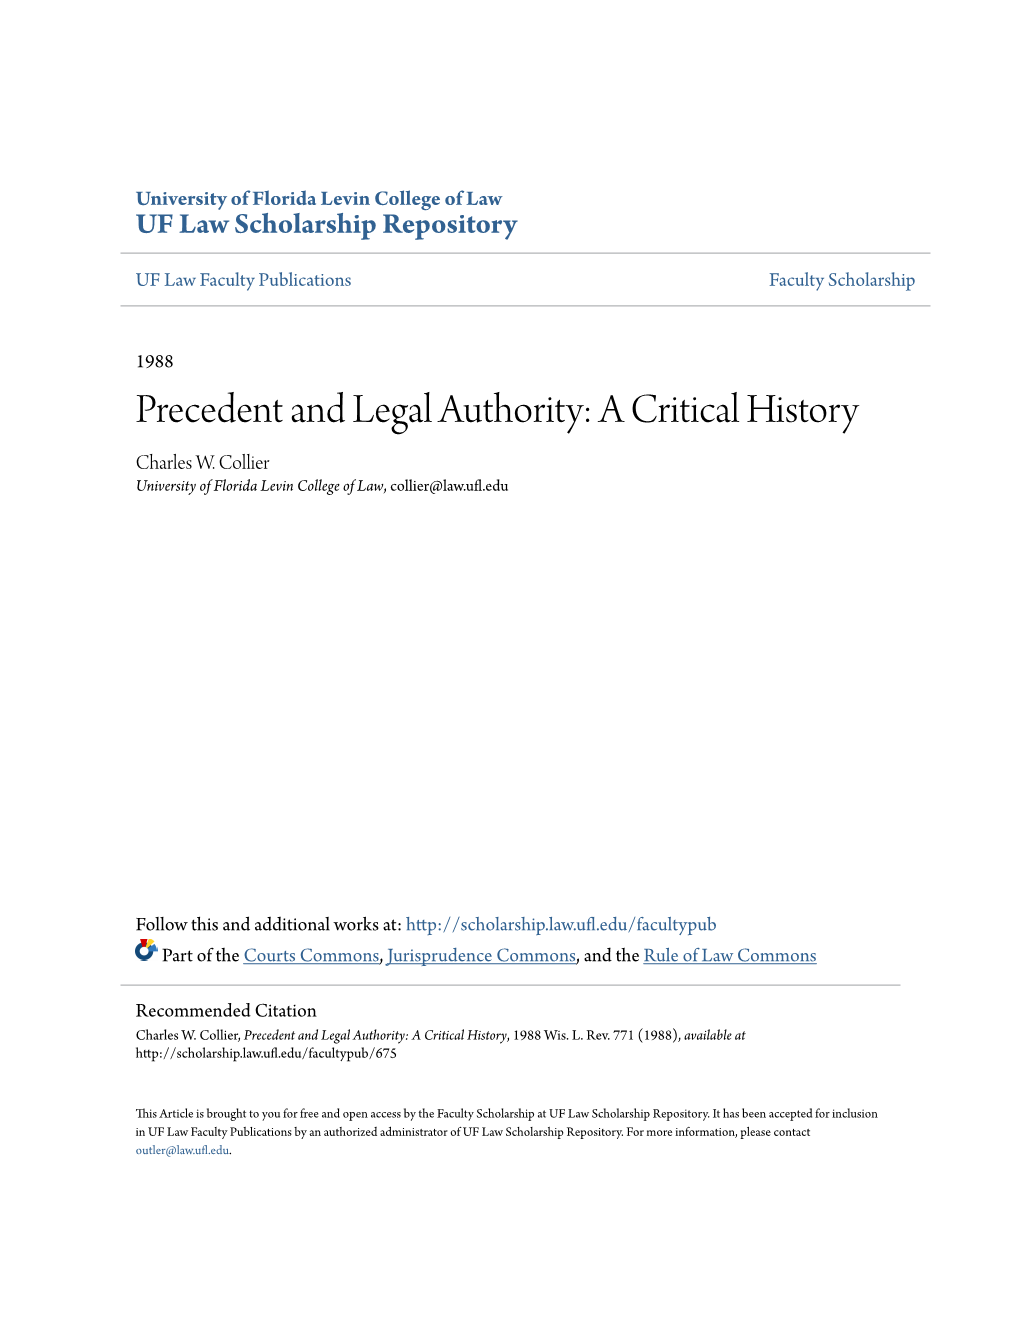 Precedent and Legal Authority: a Critical History Charles W